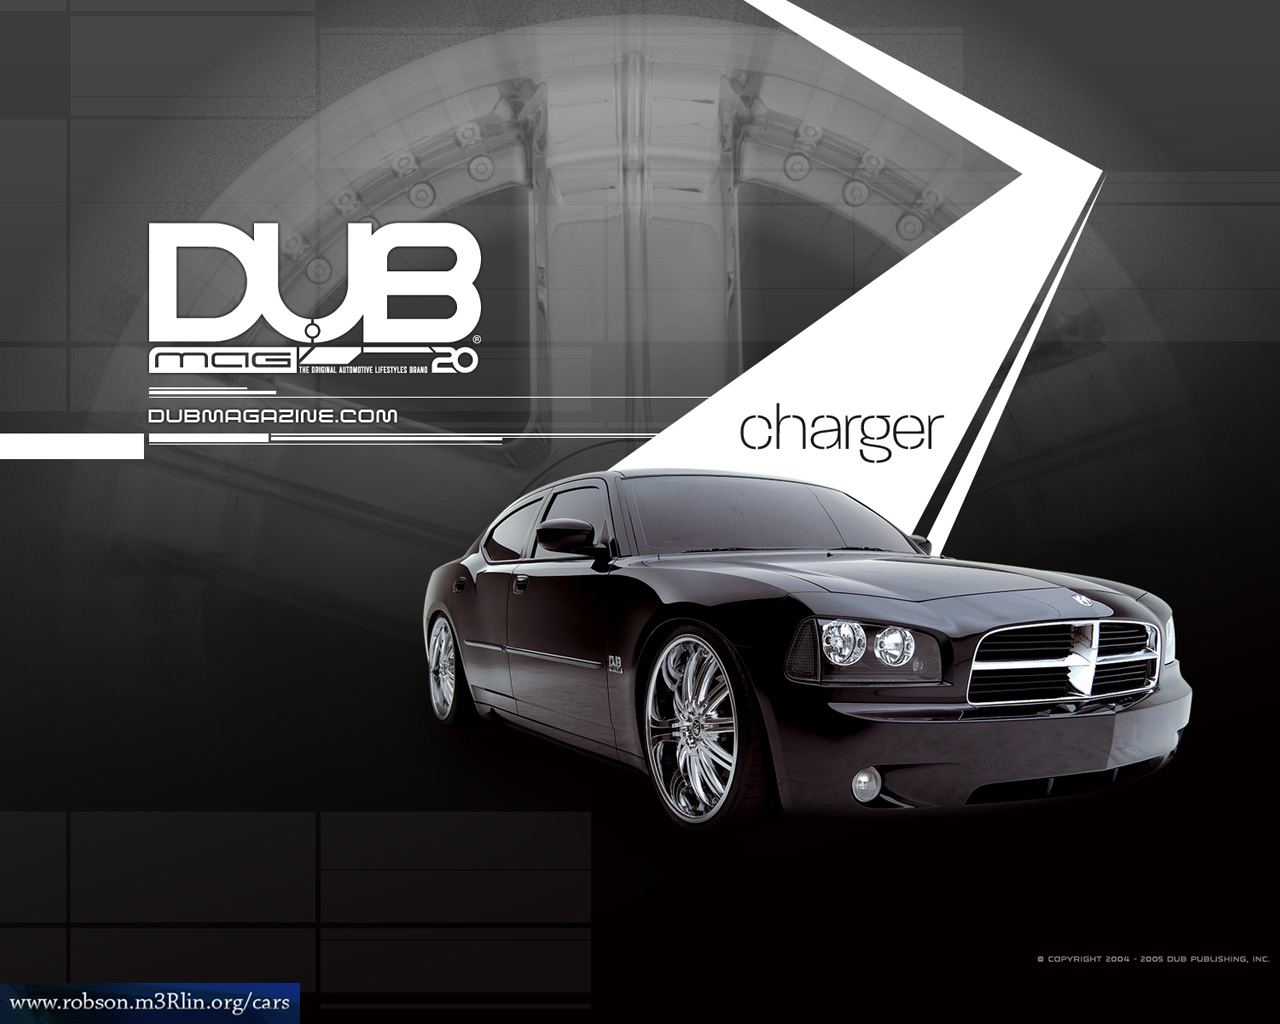 Dub Wheels Custom Car And Truck Rims Cars Pictures